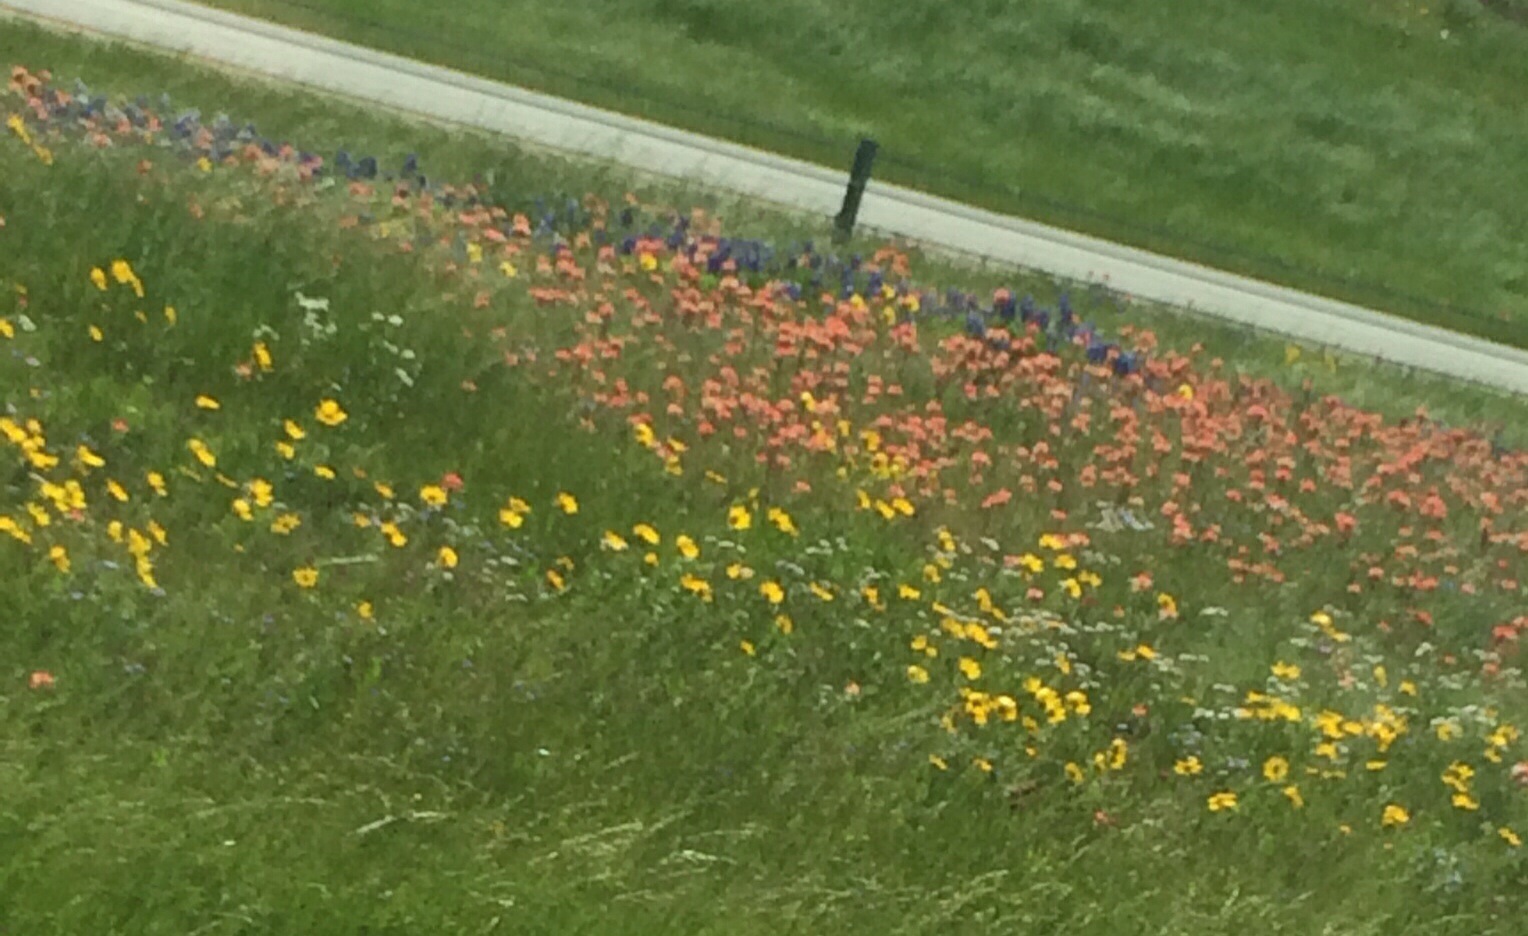 hundreds of miles of wildflowers line highway 45 between houston and dallas